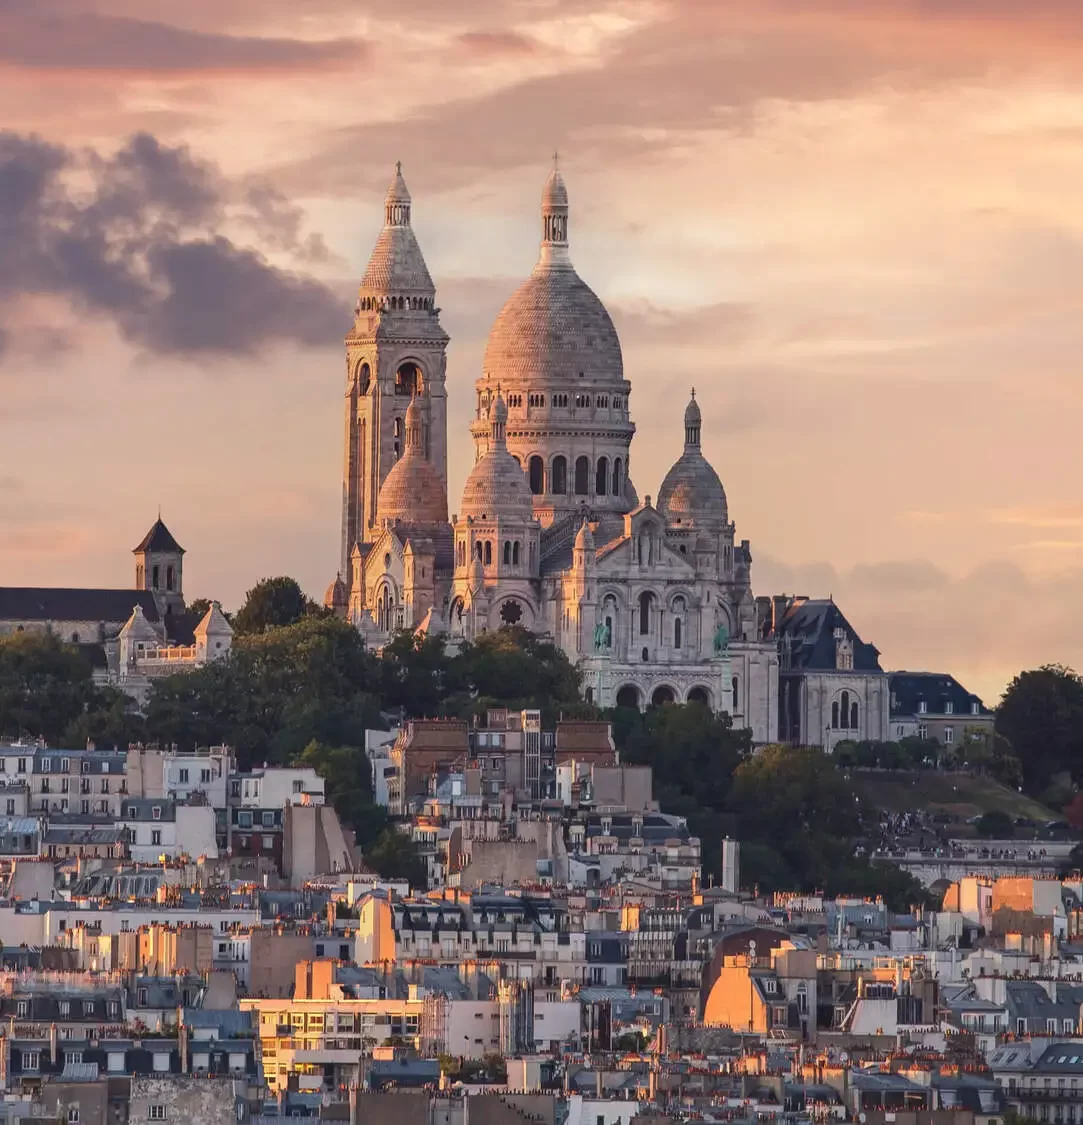 EXCURSION TO MONTMARTRE